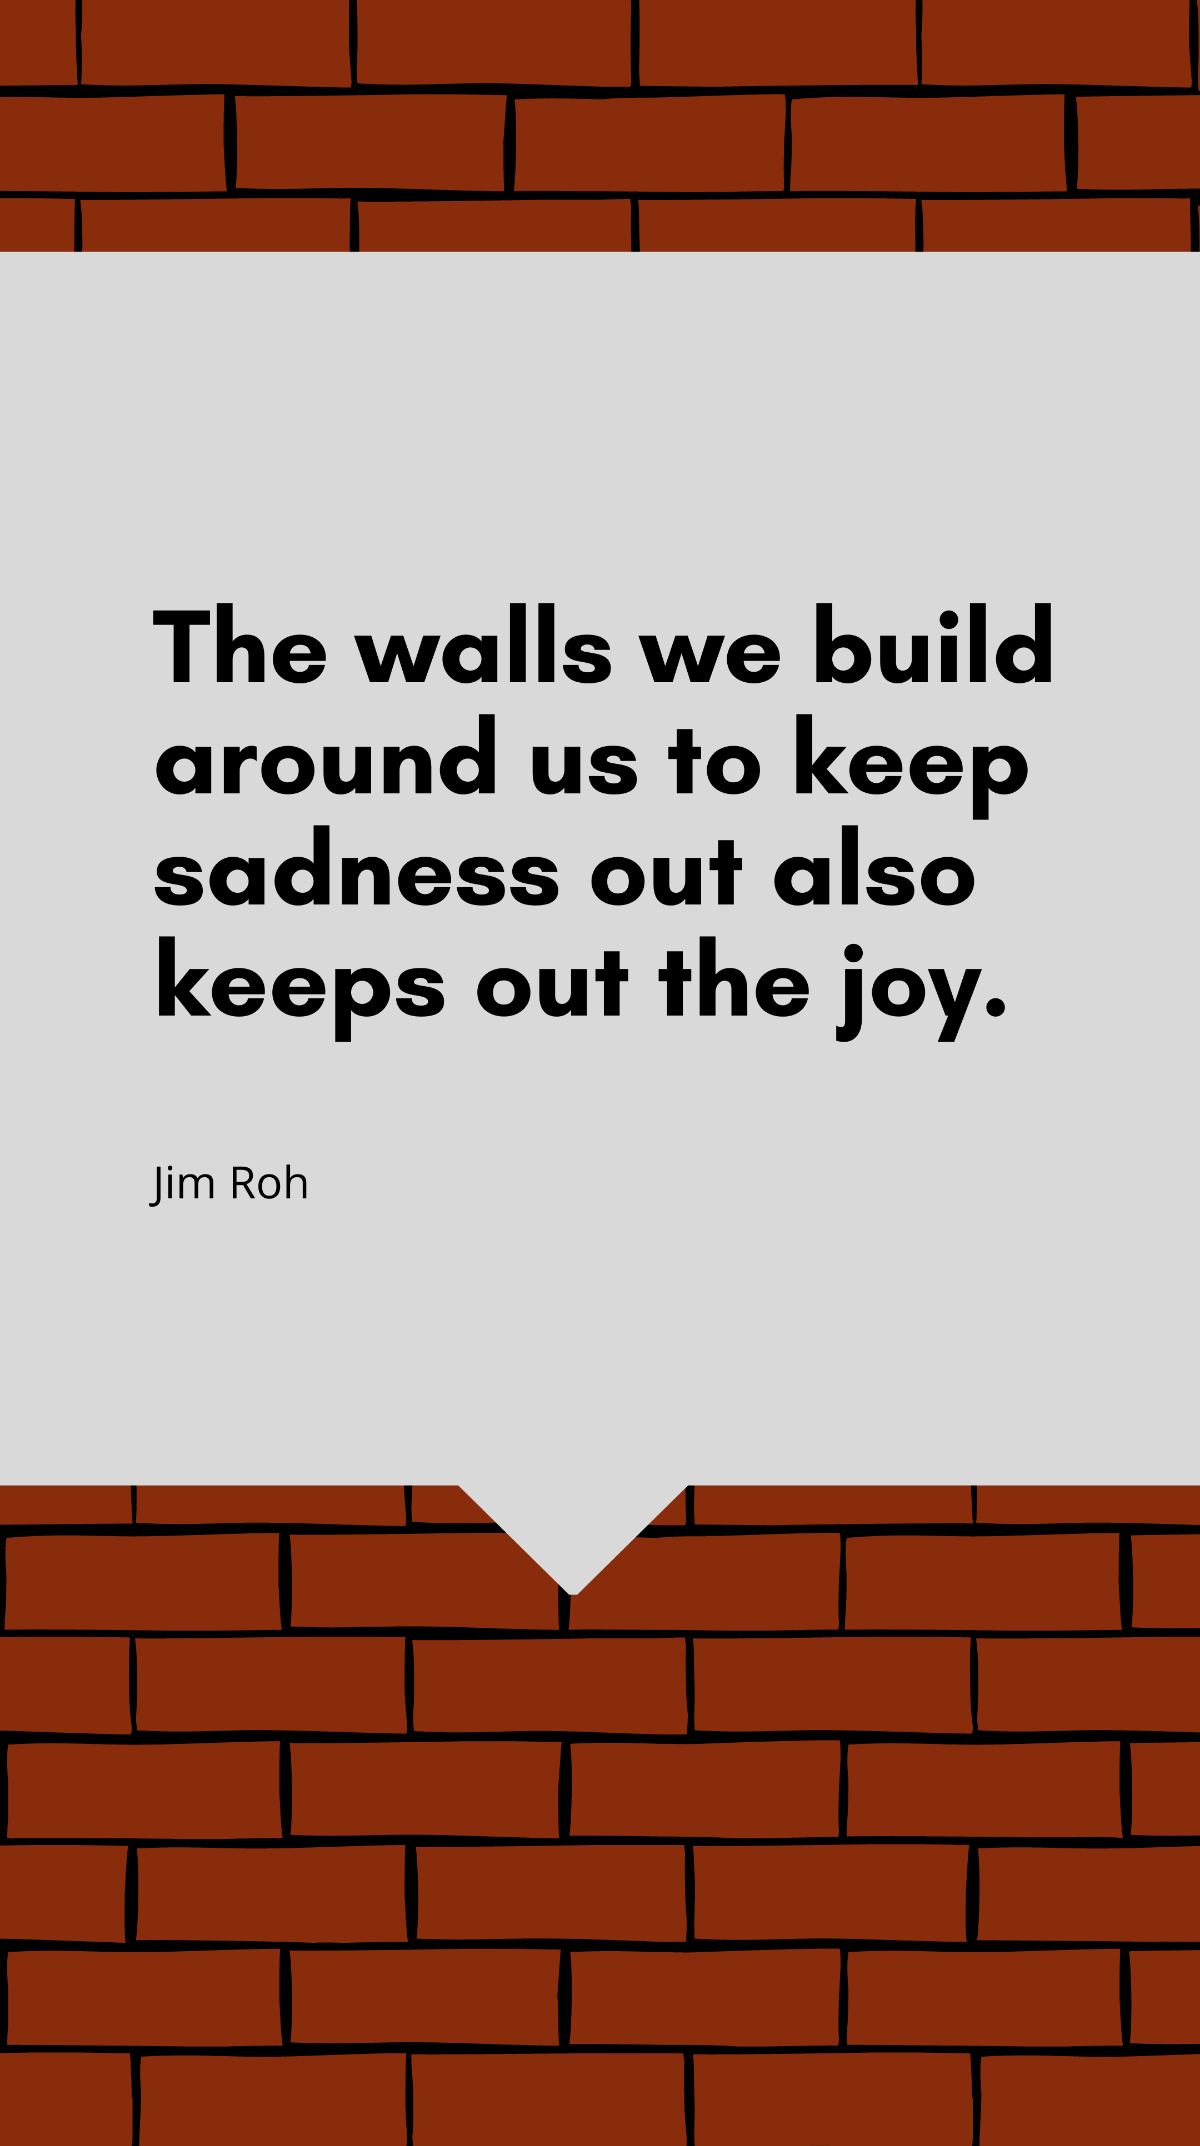 Jim Roh - The walls we build around us to keep sadness out also keeps out the joy. Template